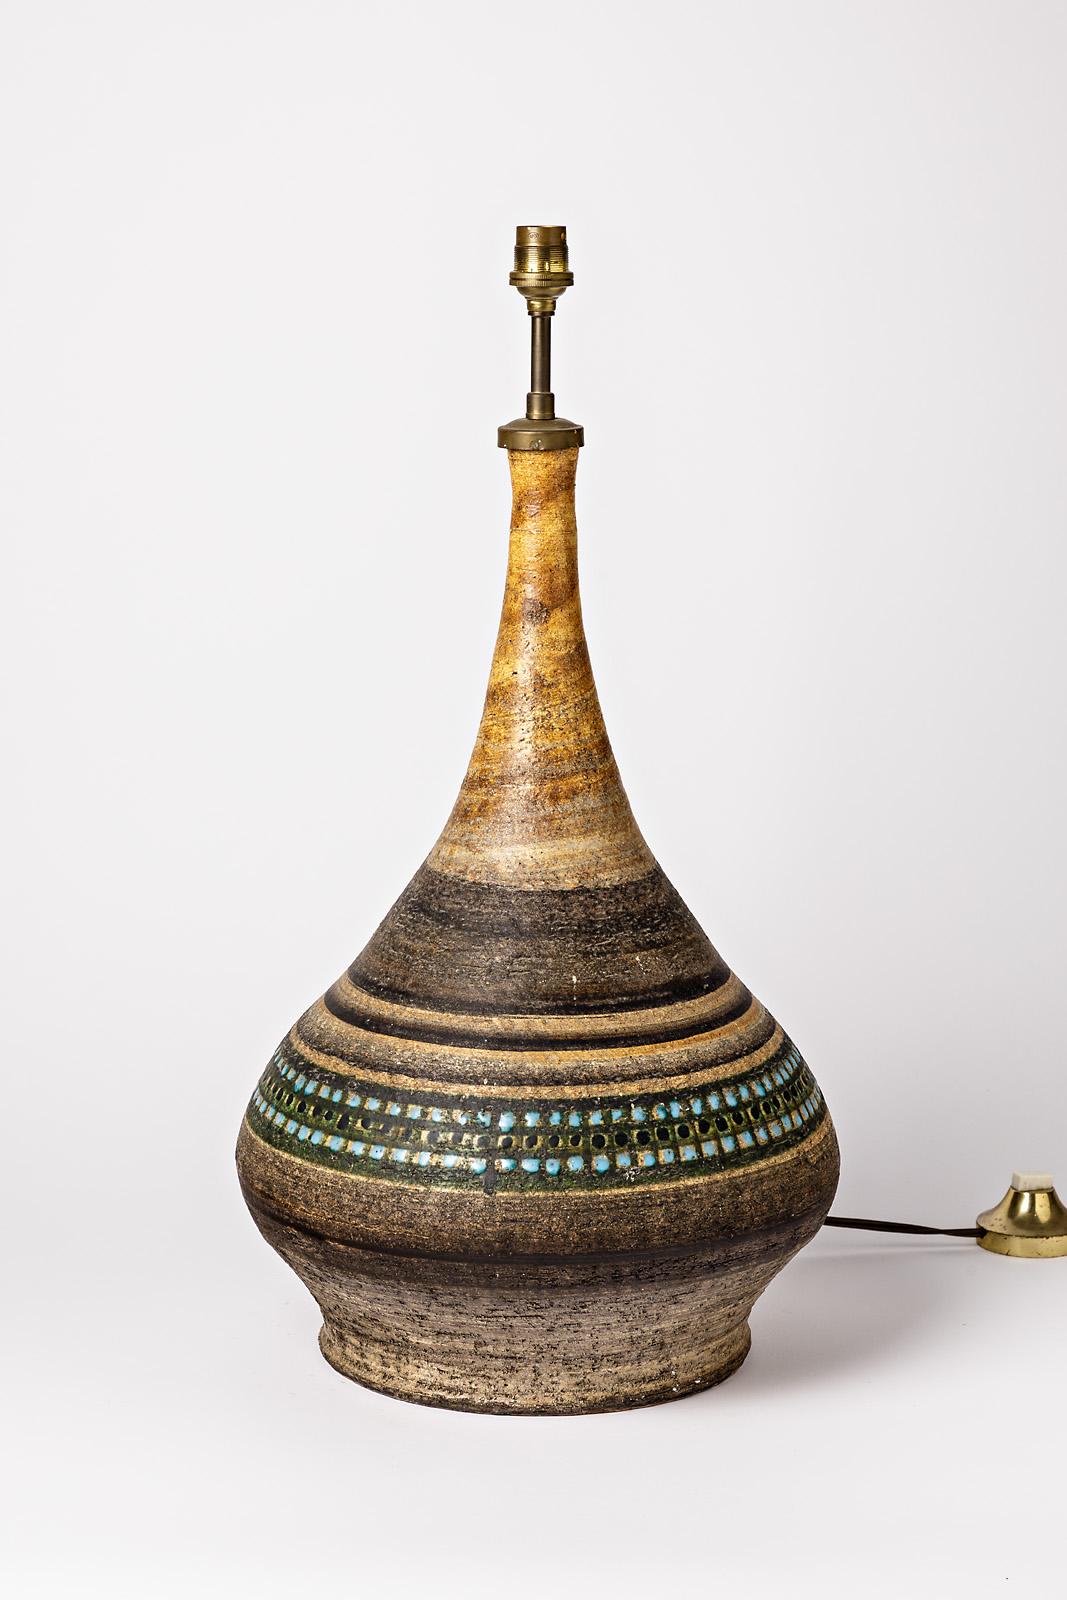 French Big Ceramic Lamp Attributed to Raphael Giarusso, to Vallauris, circa 1960-1970 For Sale